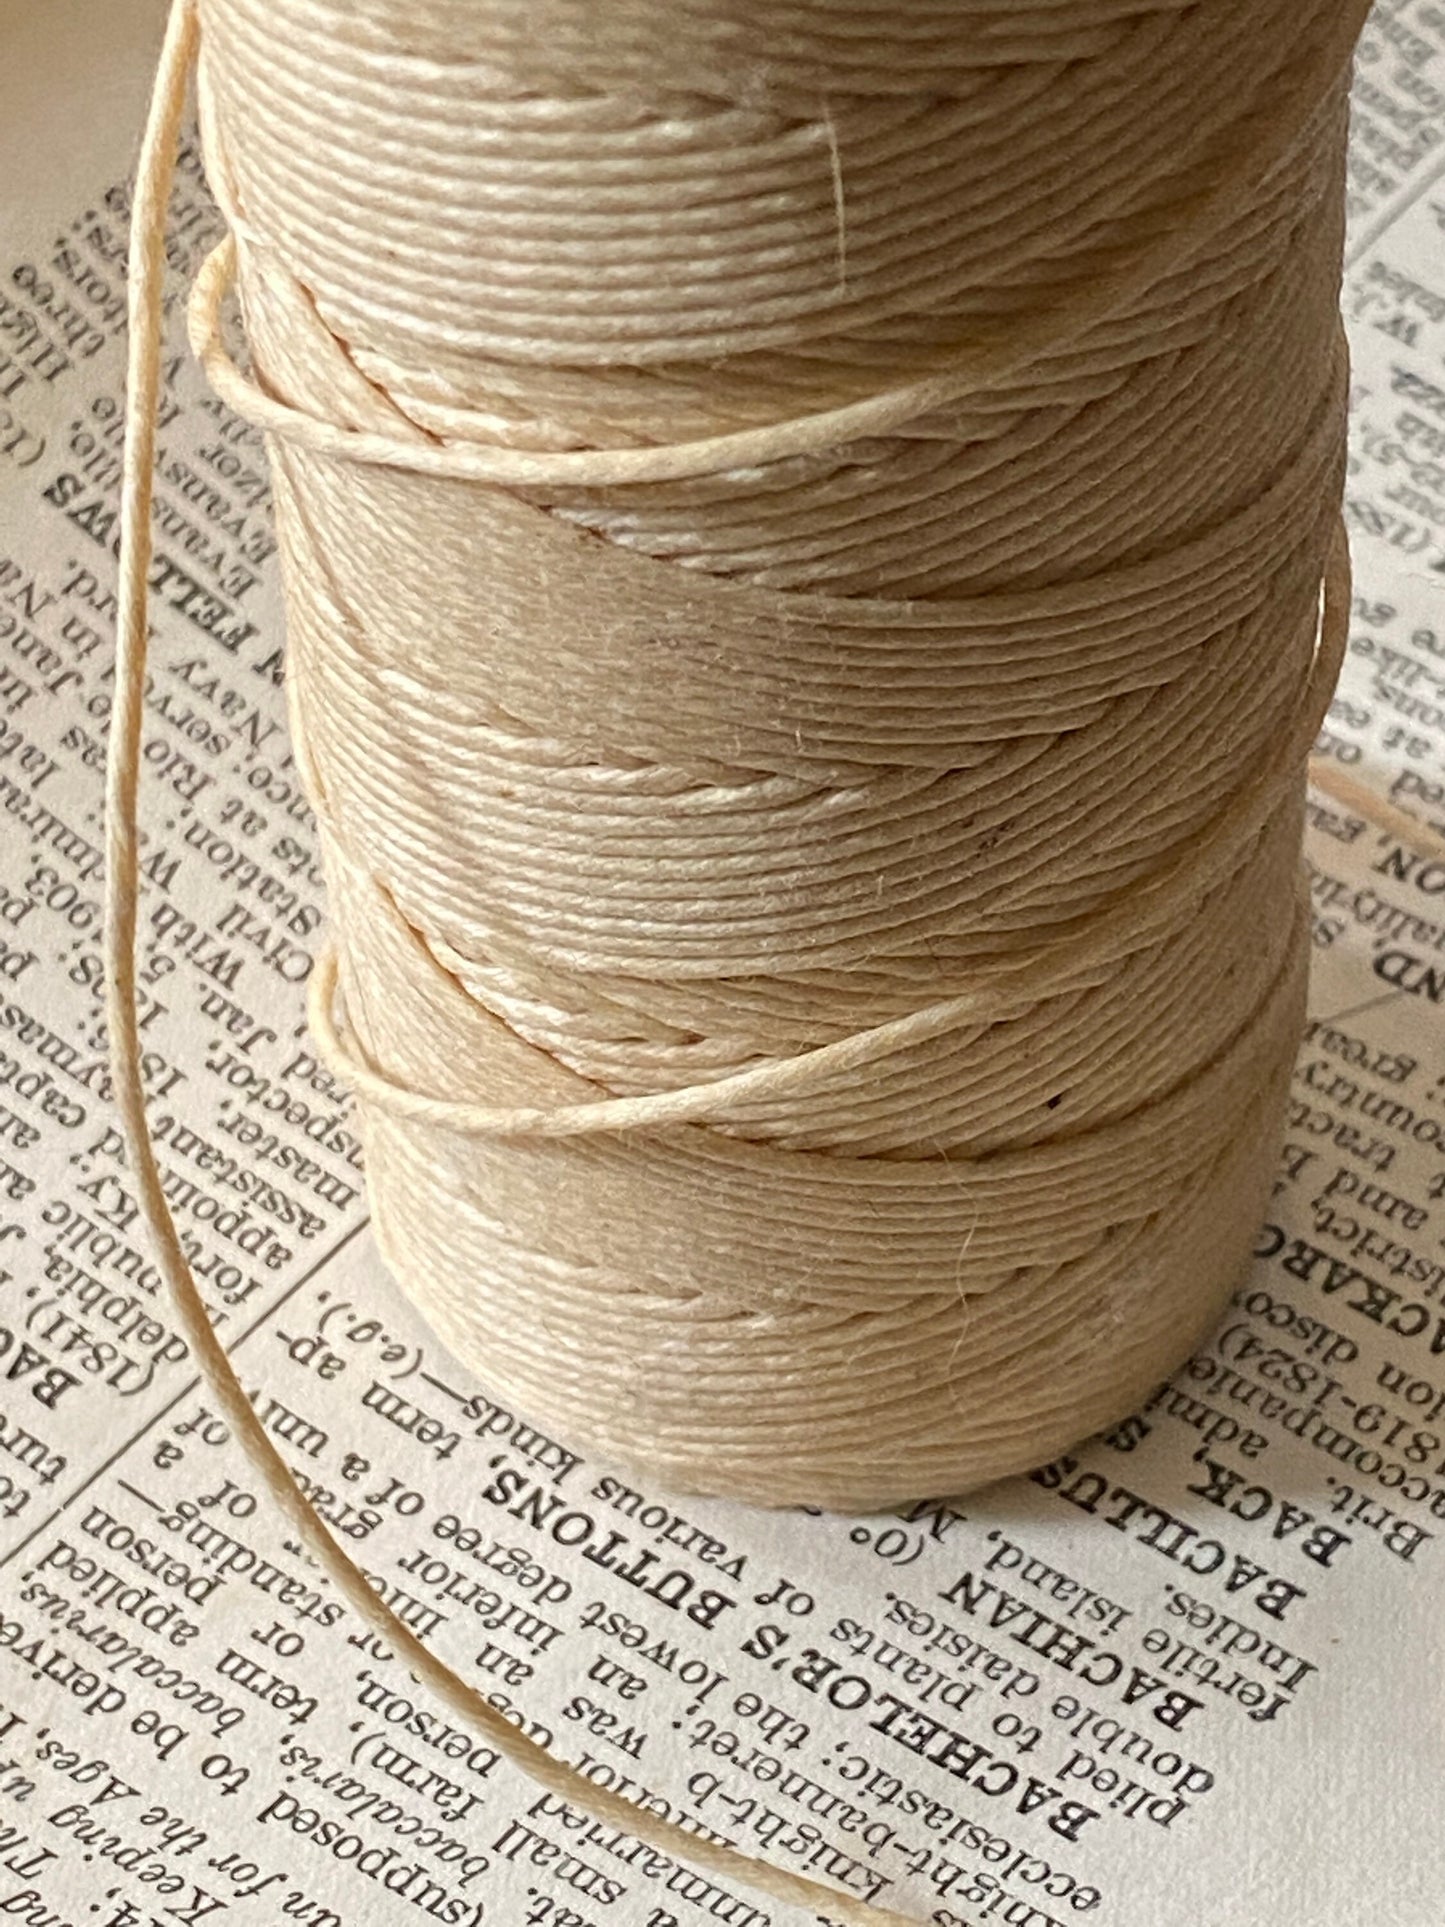 5 yards of waxed bookbinding thread - cotton 9 cord - new old stock